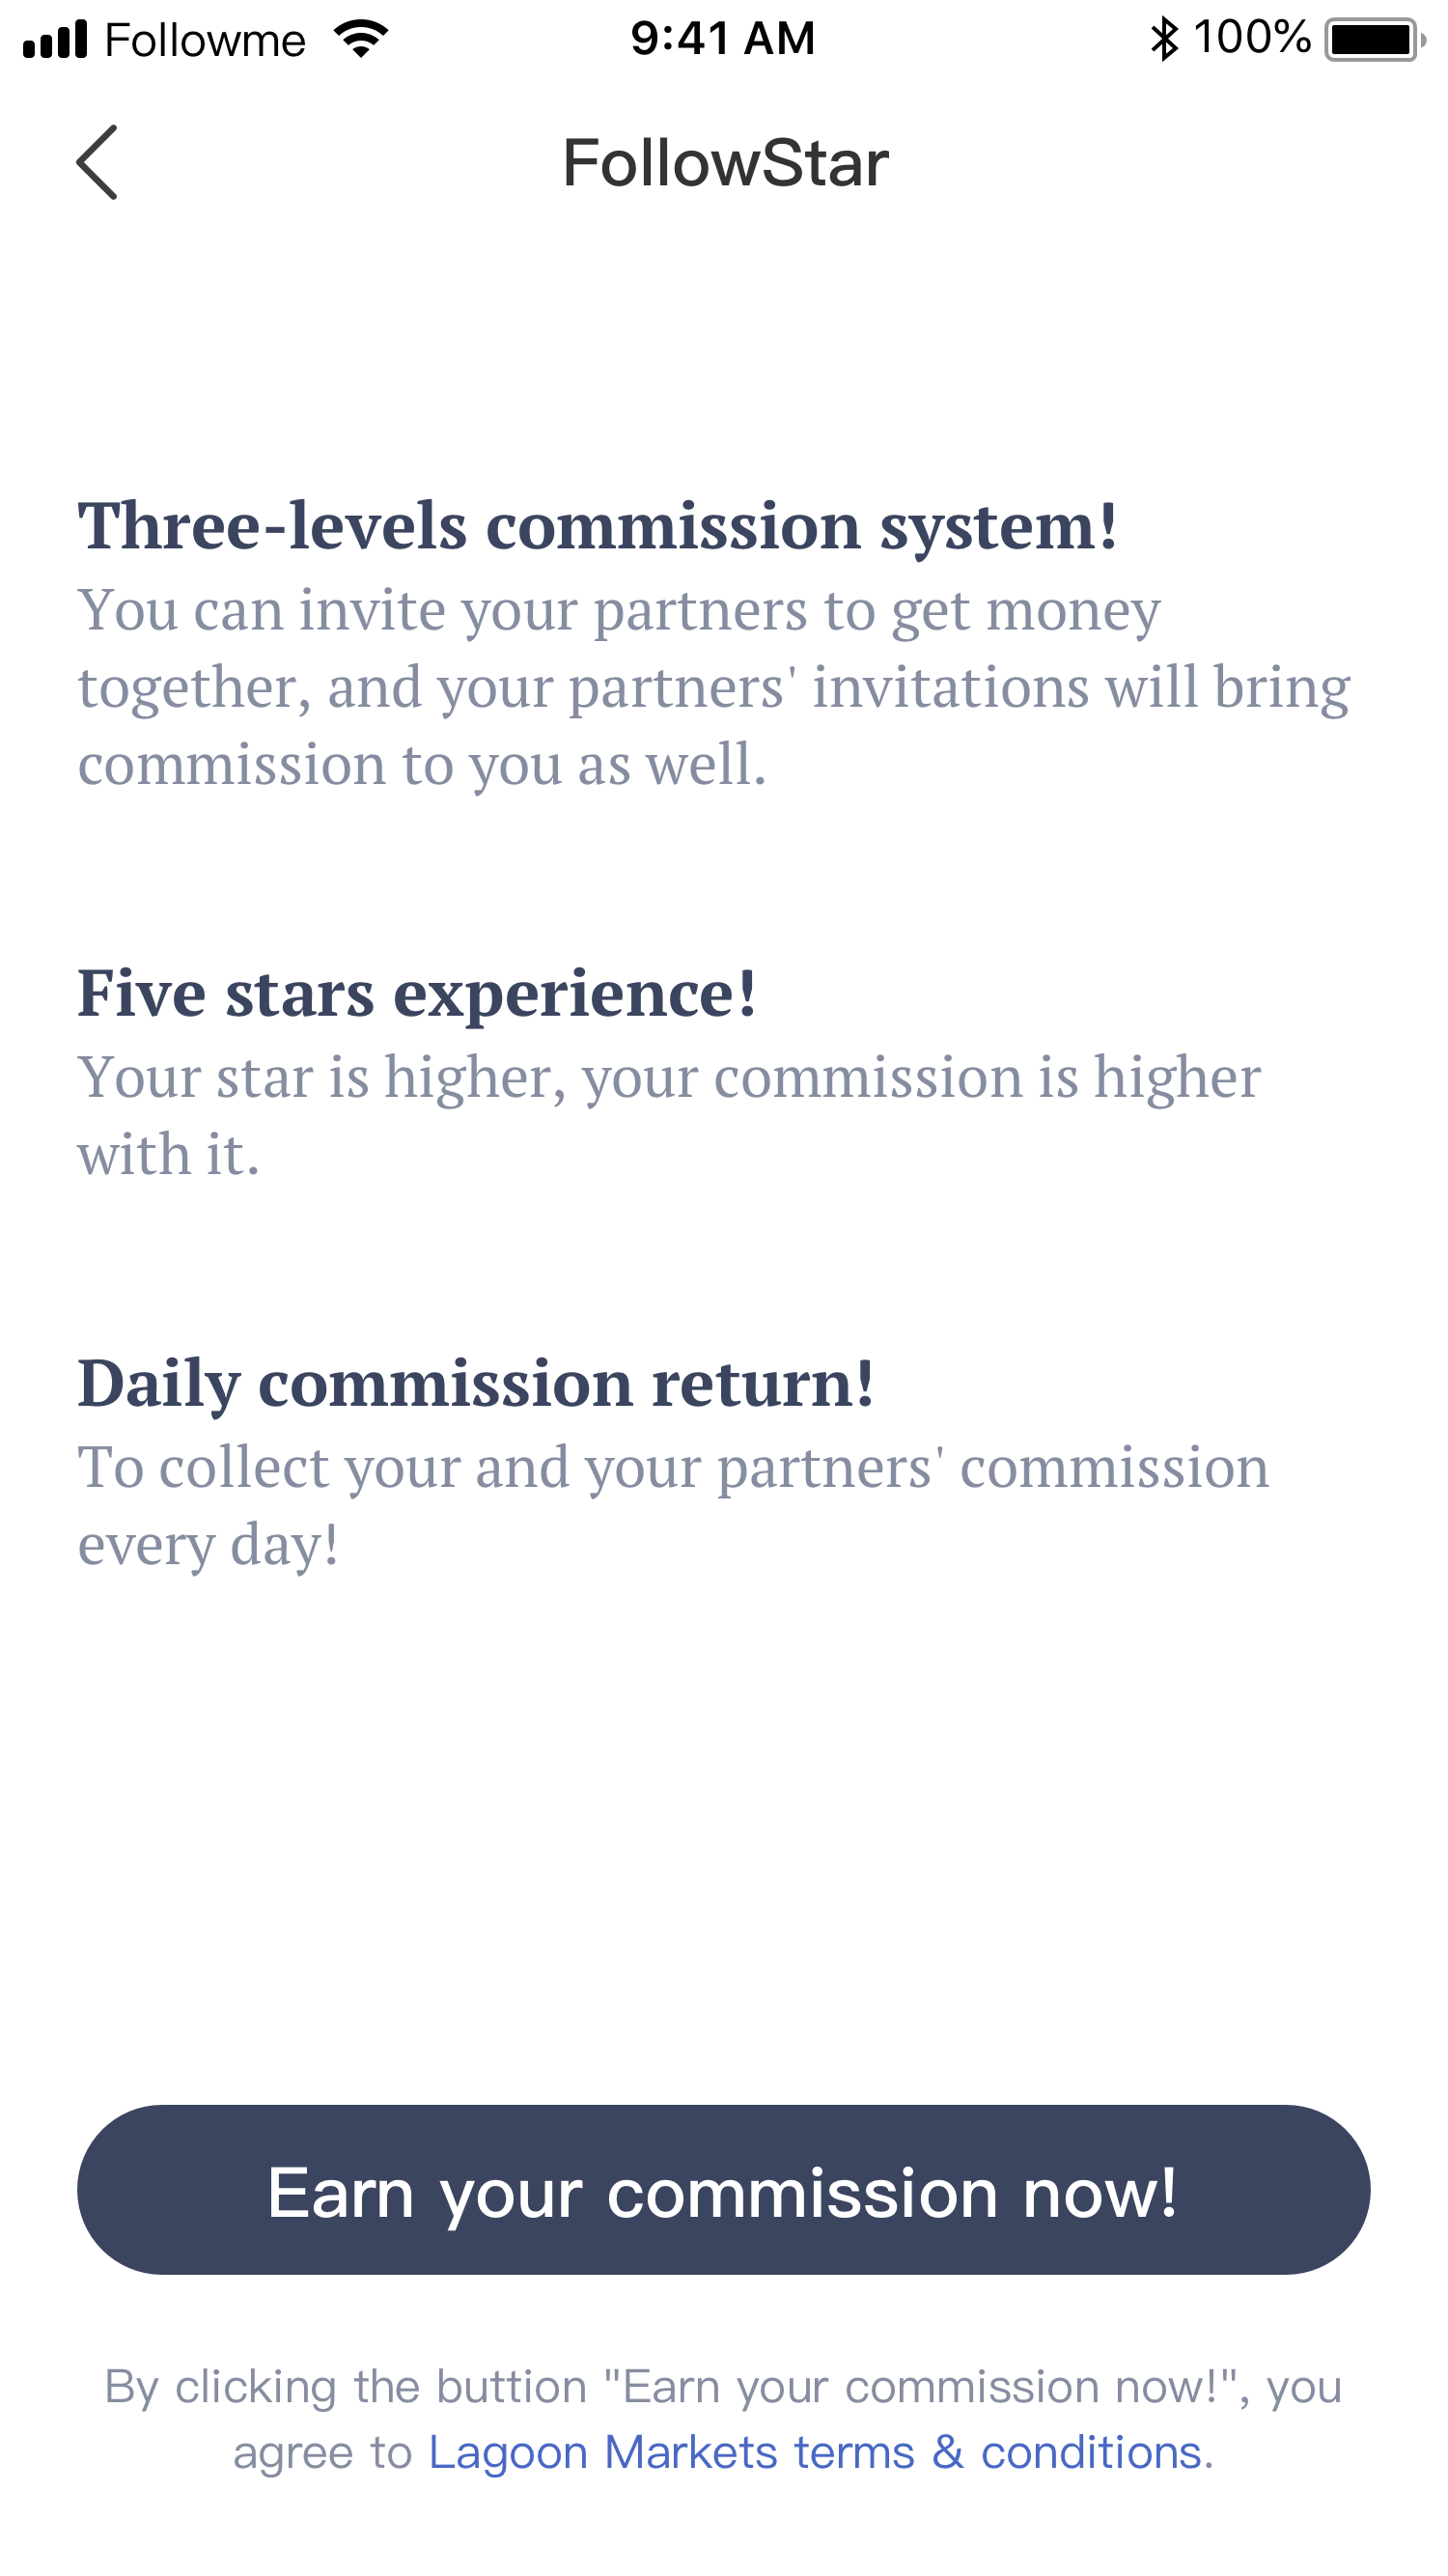 The Ultimate Commission Experience is at FOLLOWSTAR